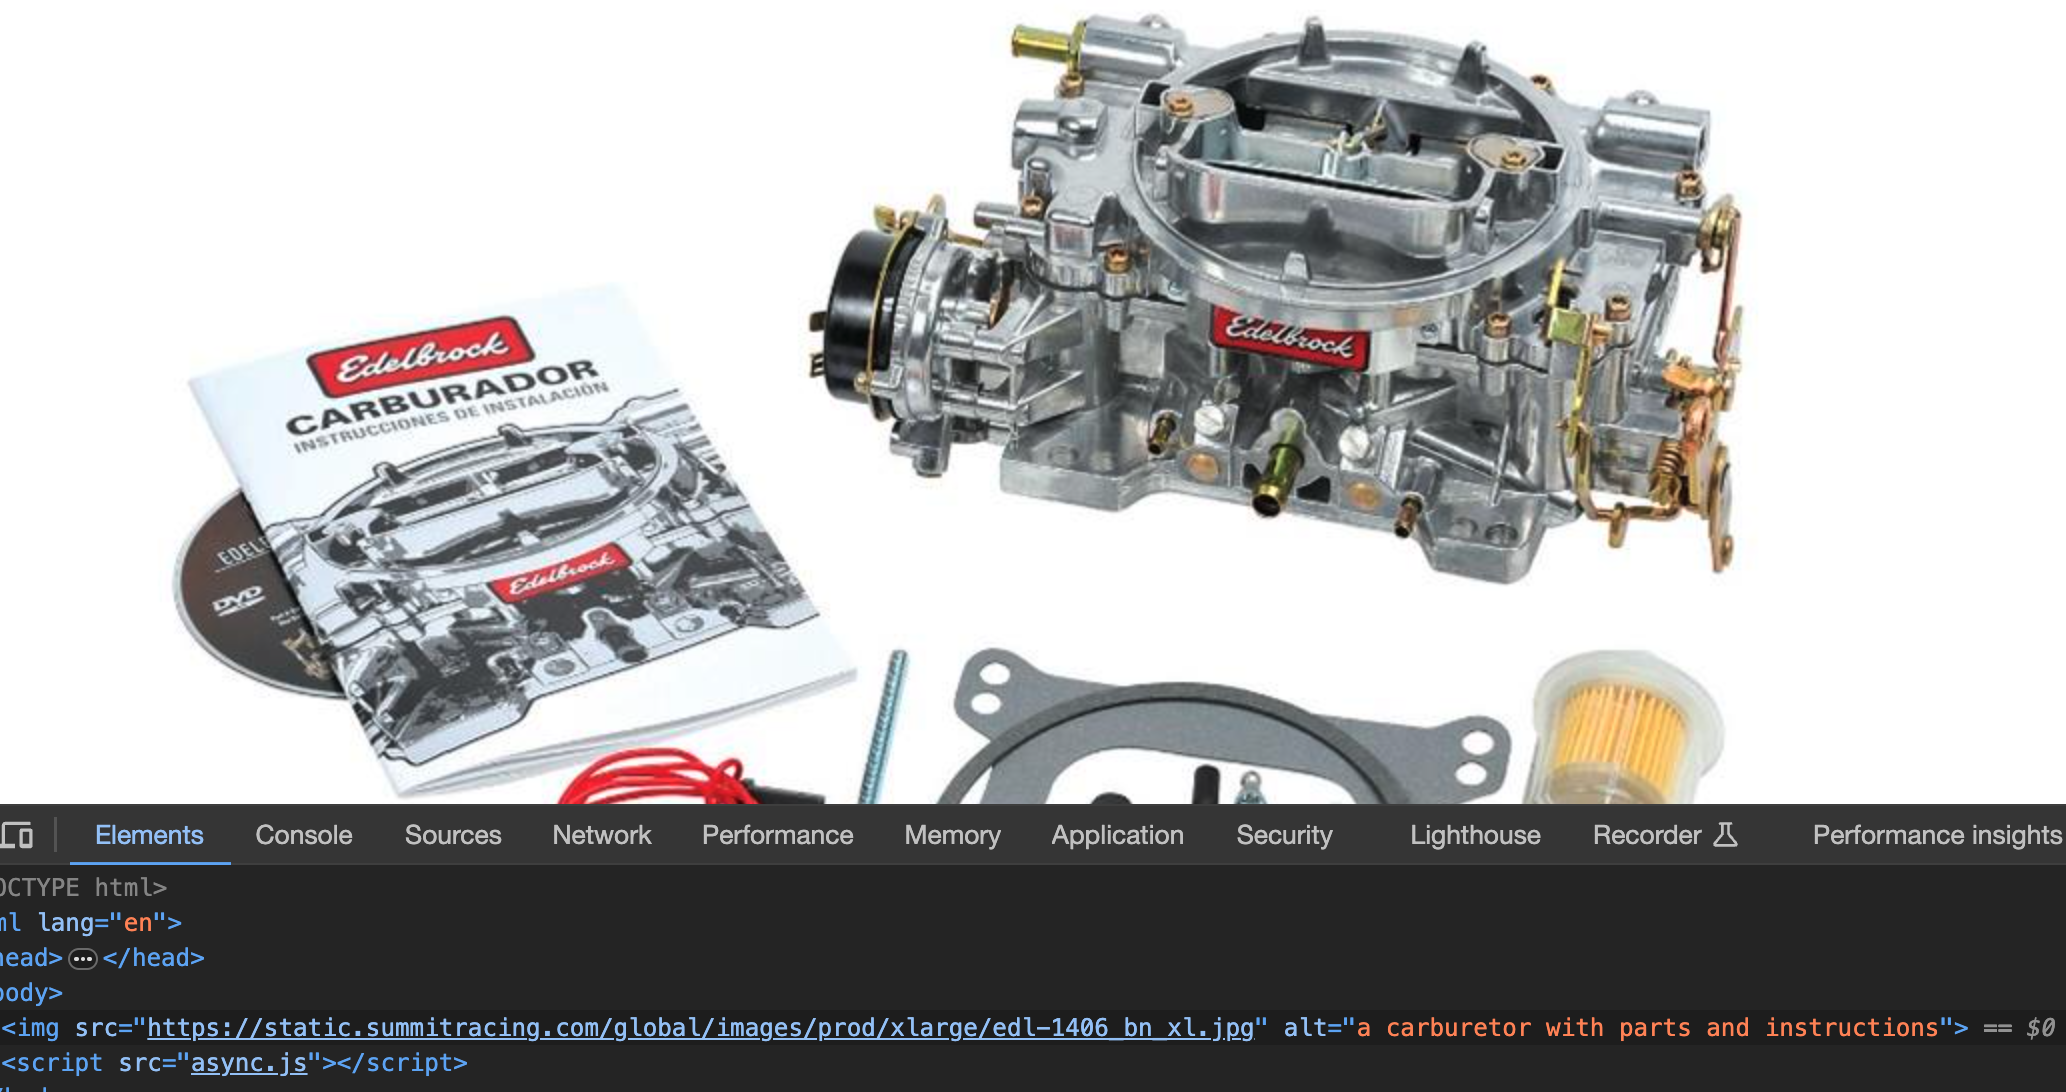 A carburetor with parts and instructions